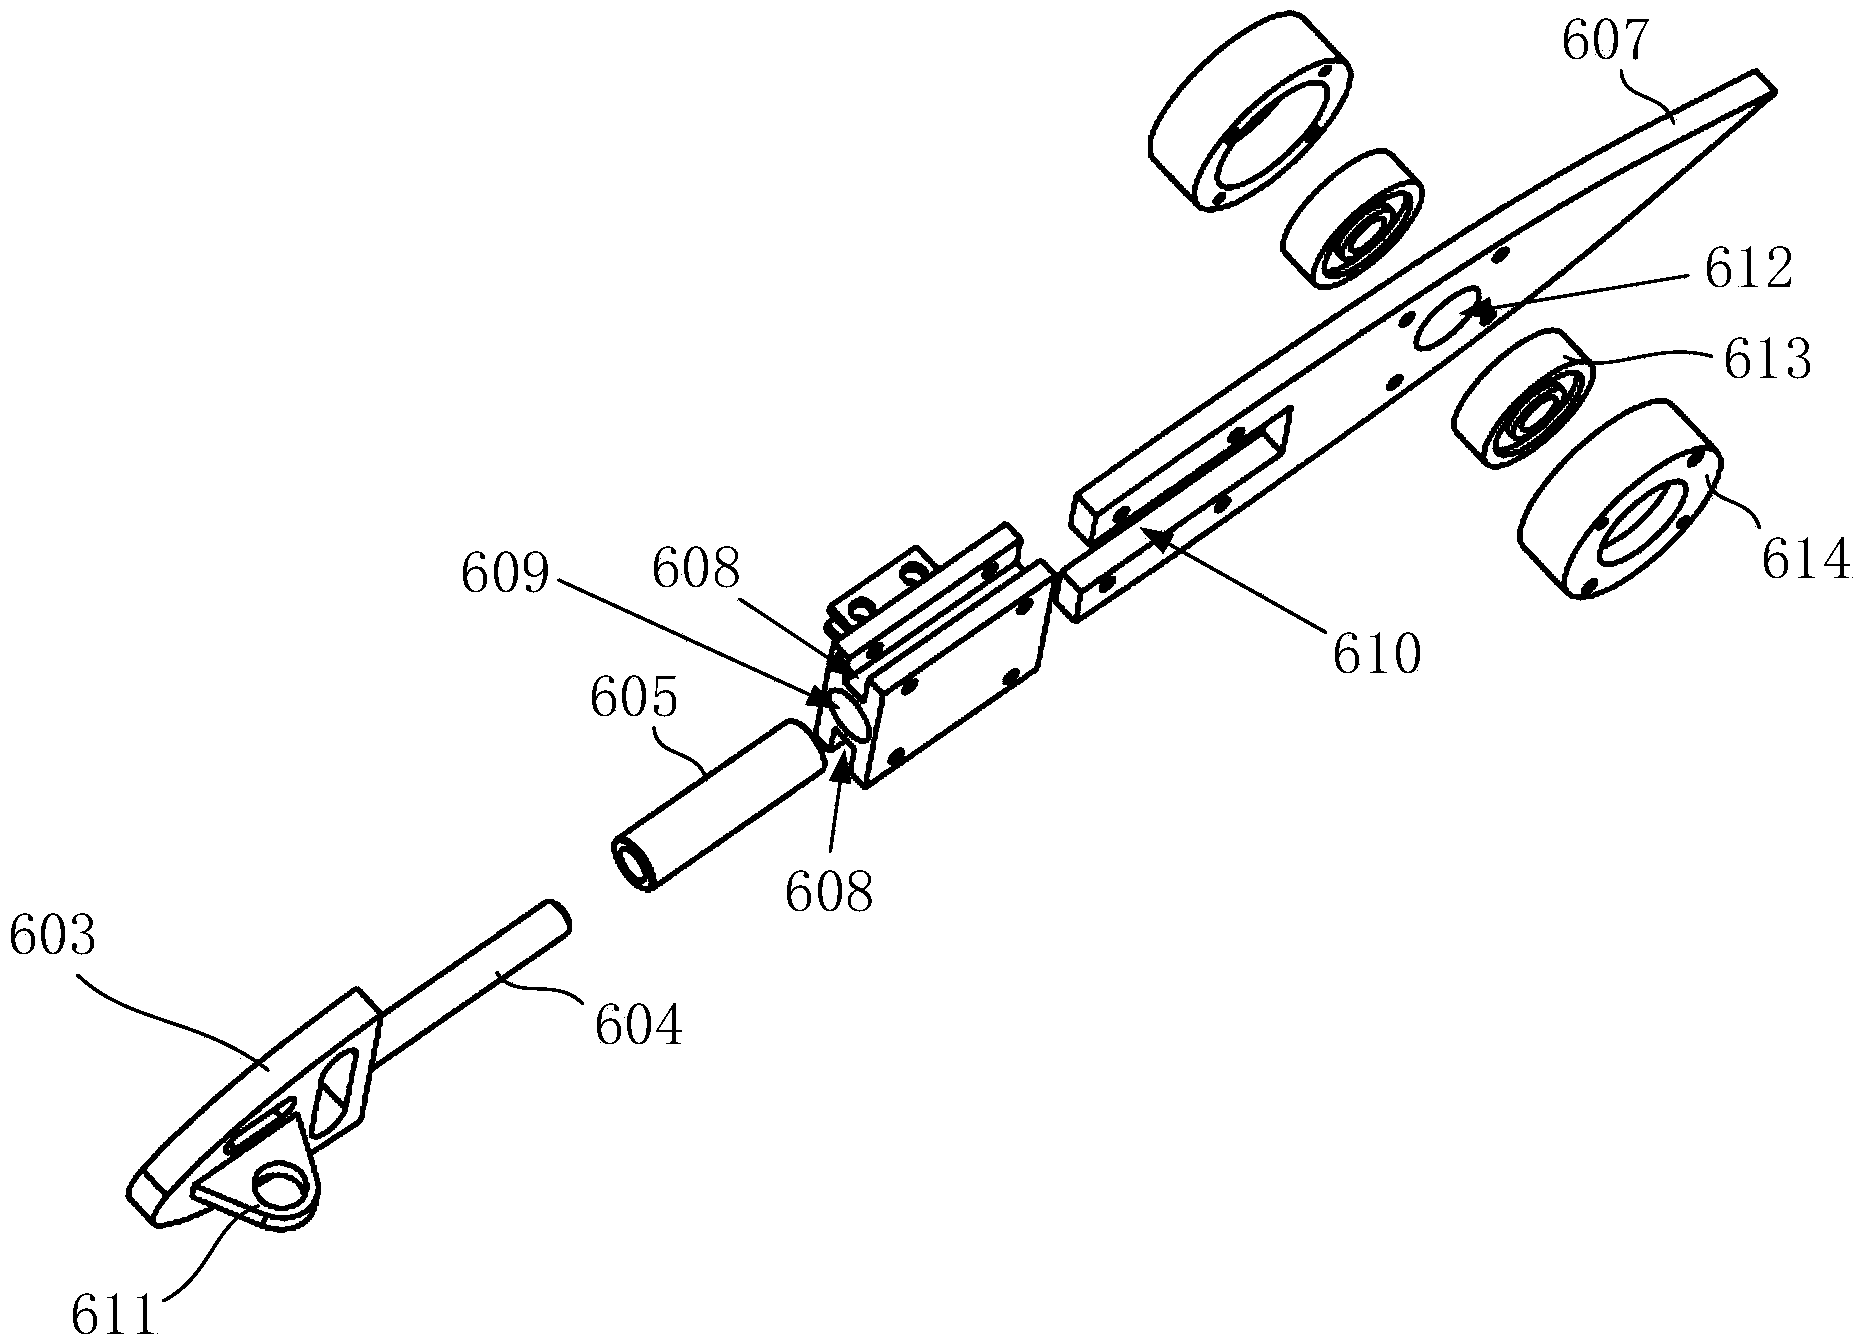 Underwater propulsion device based on two-stage parallel-connection type oscillating bar mechanism drive